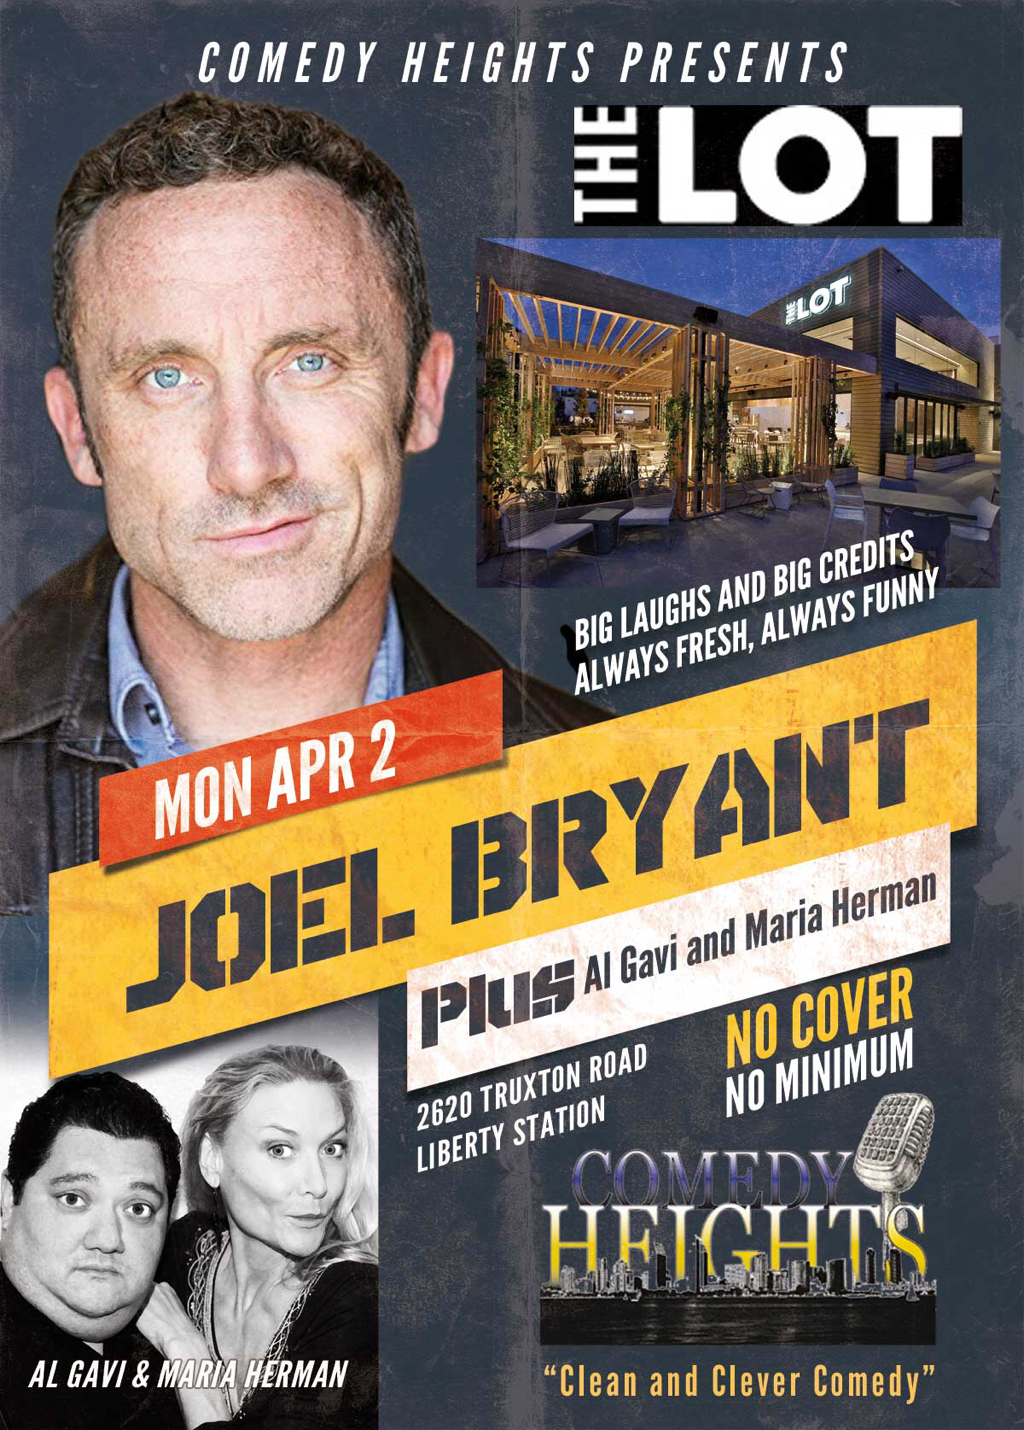 Stand-up comedy headliner at The Lot in San Diego, CA